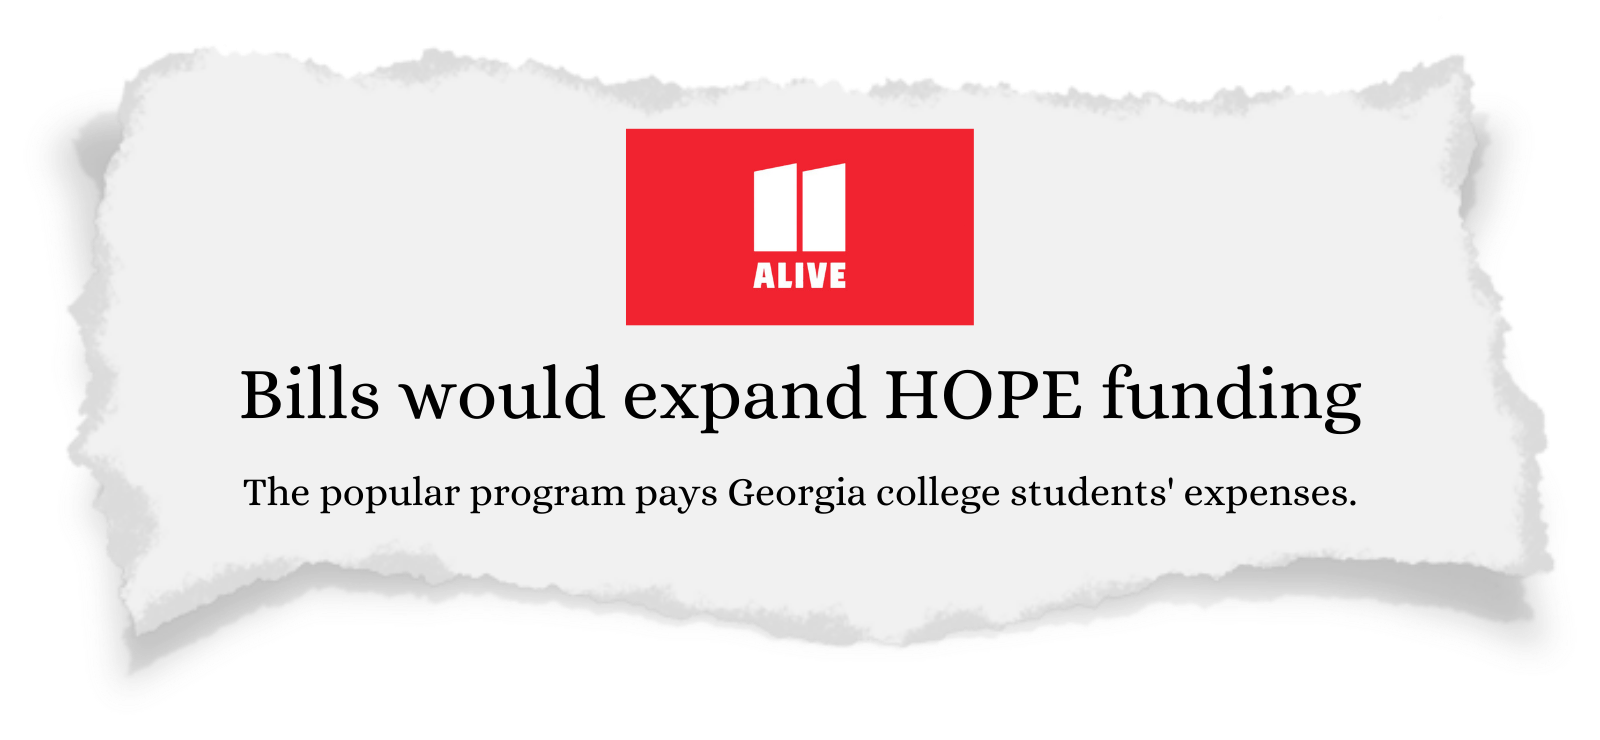 11Alive: Bills would expand HOPE funding; The popular program pays Georgia college students' expenses.